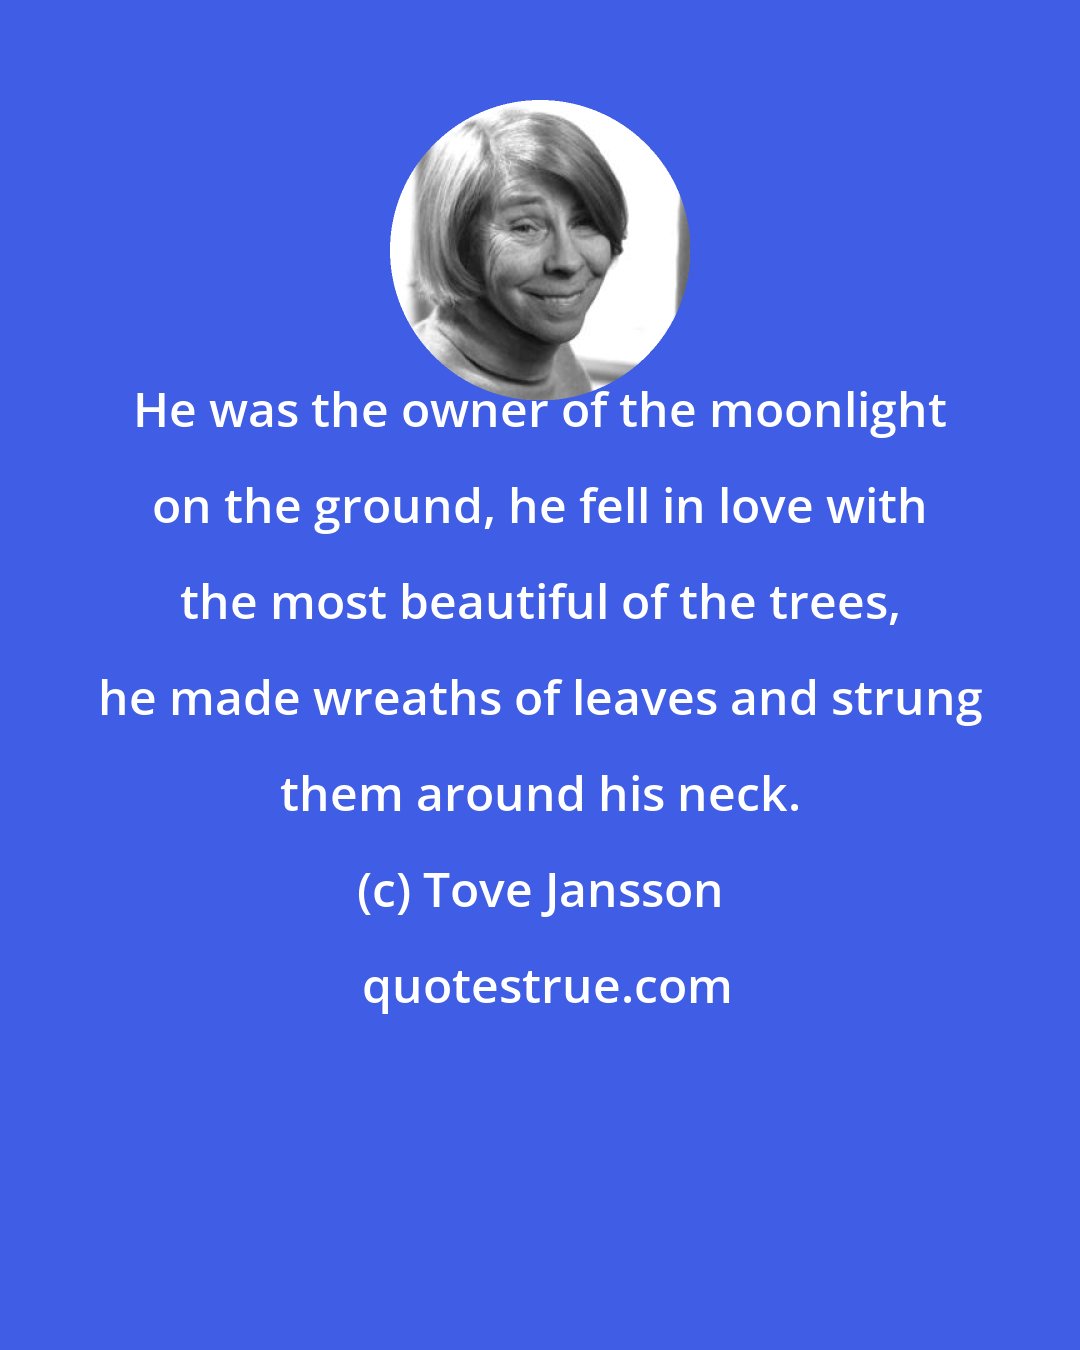 Tove Jansson: He was the owner of the moonlight on the ground, he fell in love with the most beautiful of the trees, he made wreaths of leaves and strung them around his neck.